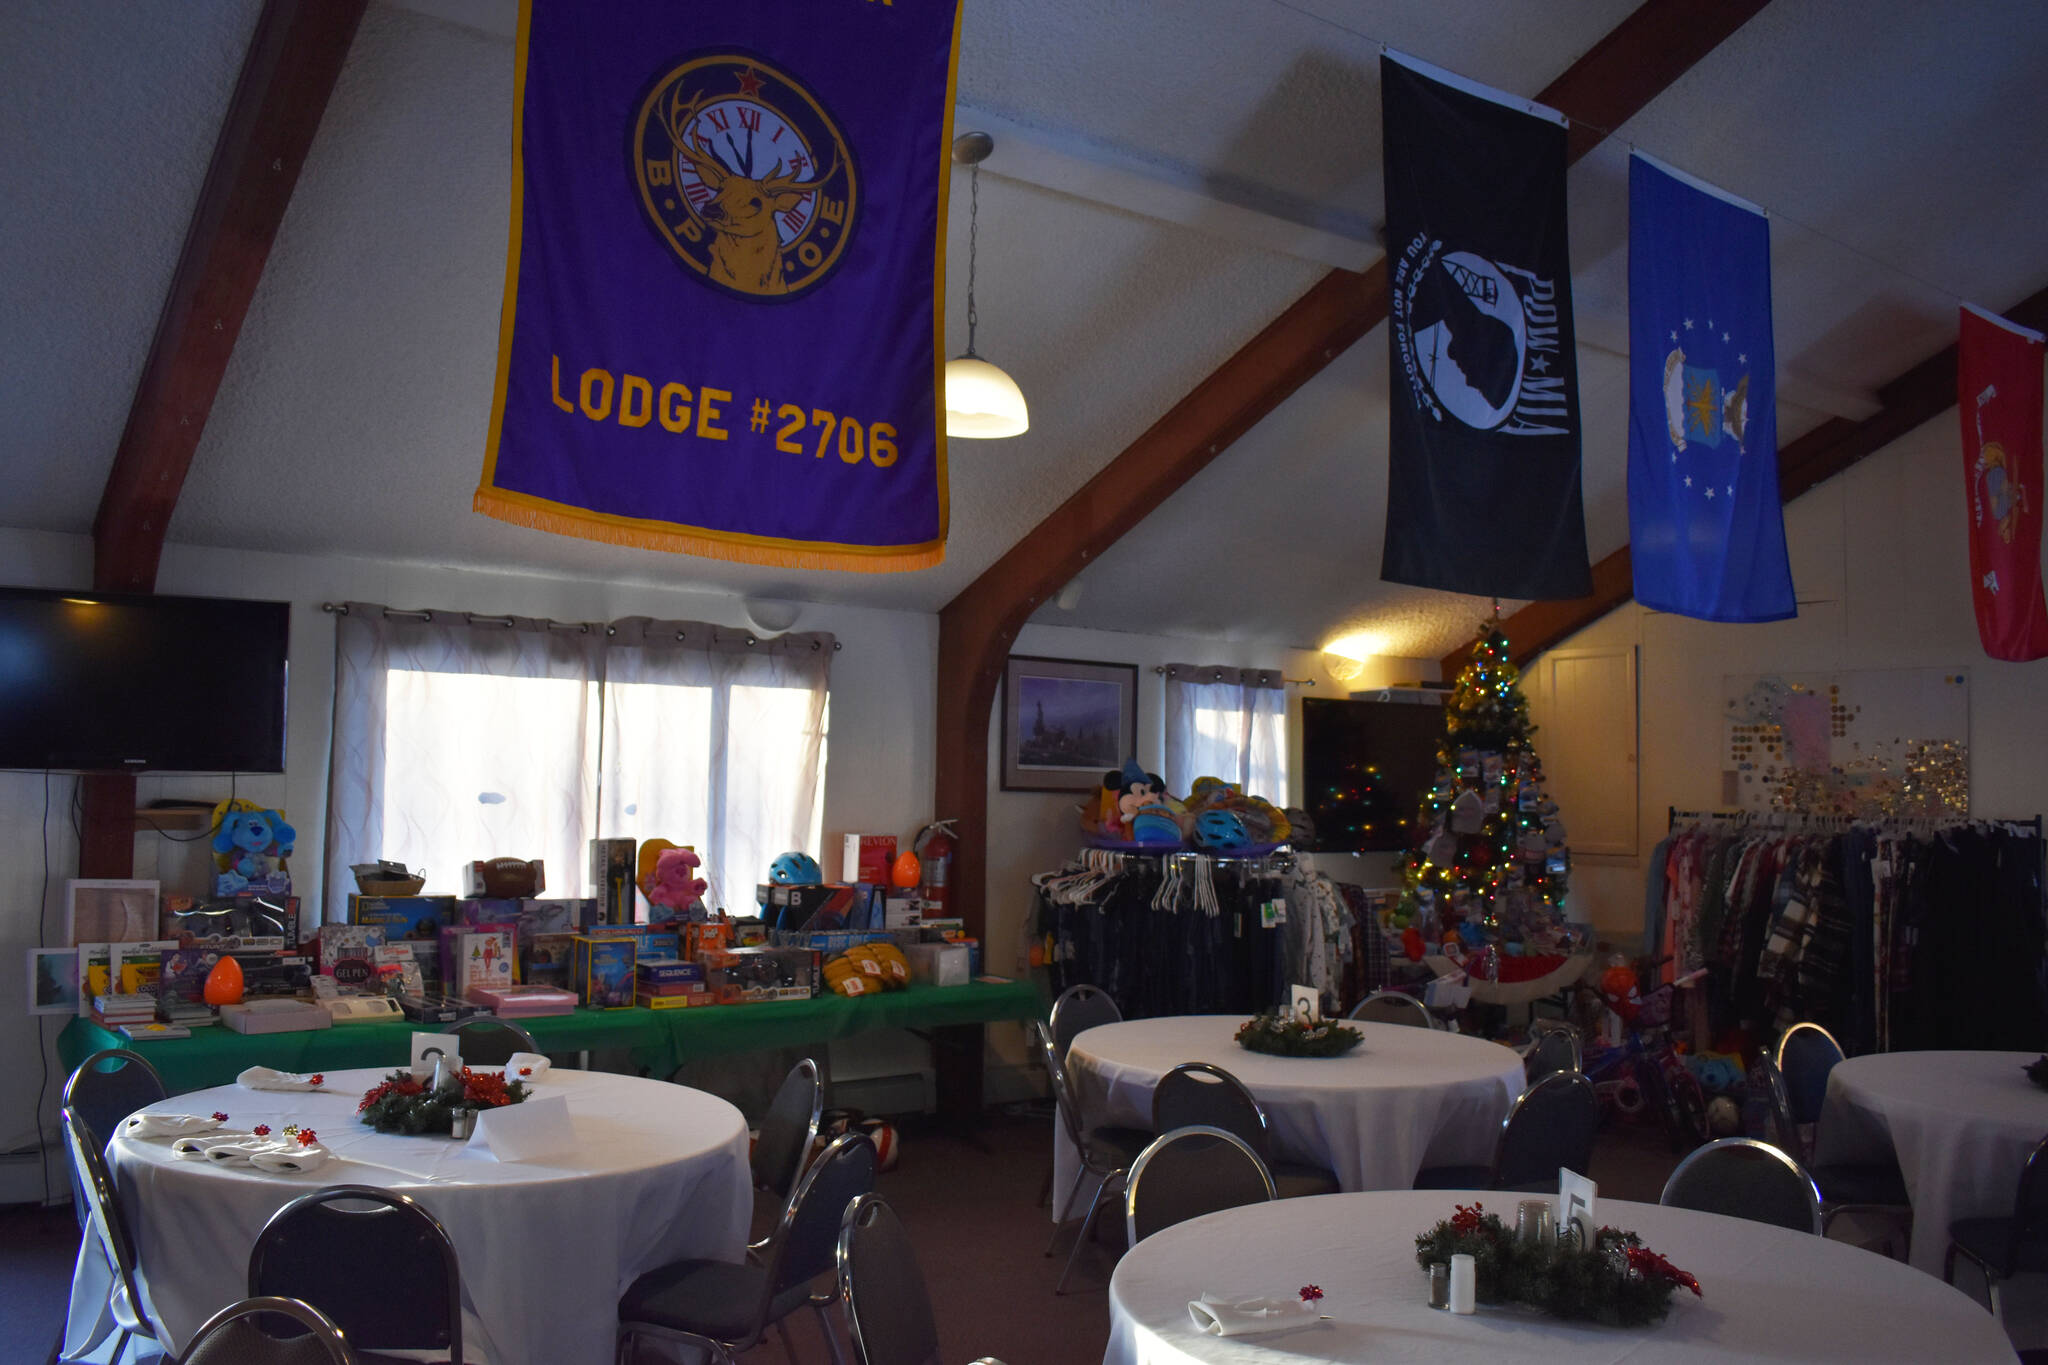 Toys and clothes are displayed, ready to be donated, at the Soldotna Elks Lodge #2706 in Soldotna, Alaska, on Friday, Dec. 2, 2022. (Jake Dye/Peninsula Clarion)